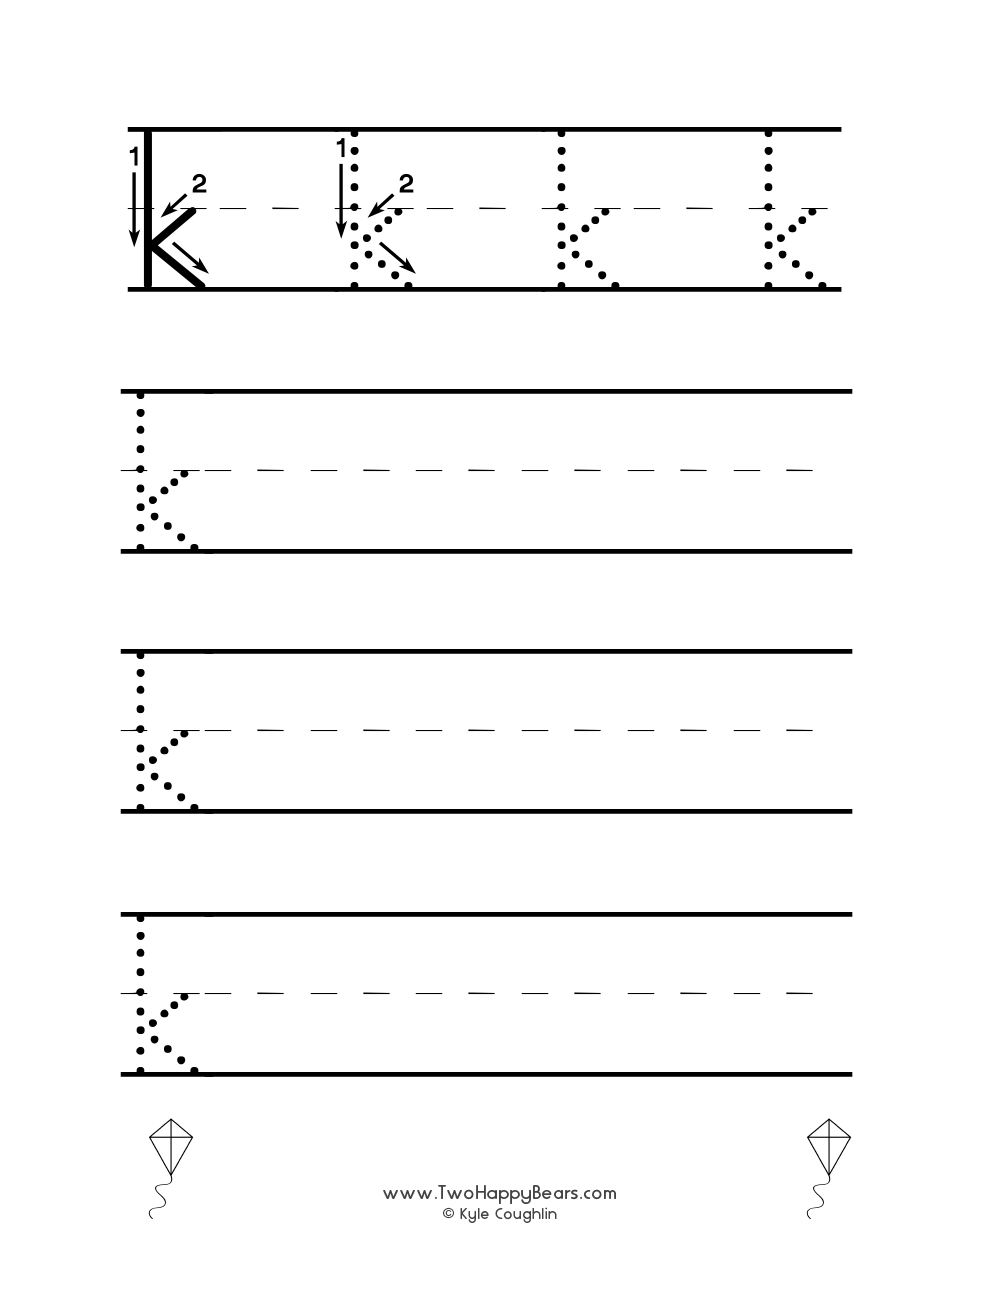 Lowercase letter K worksheet for tracing and drawing